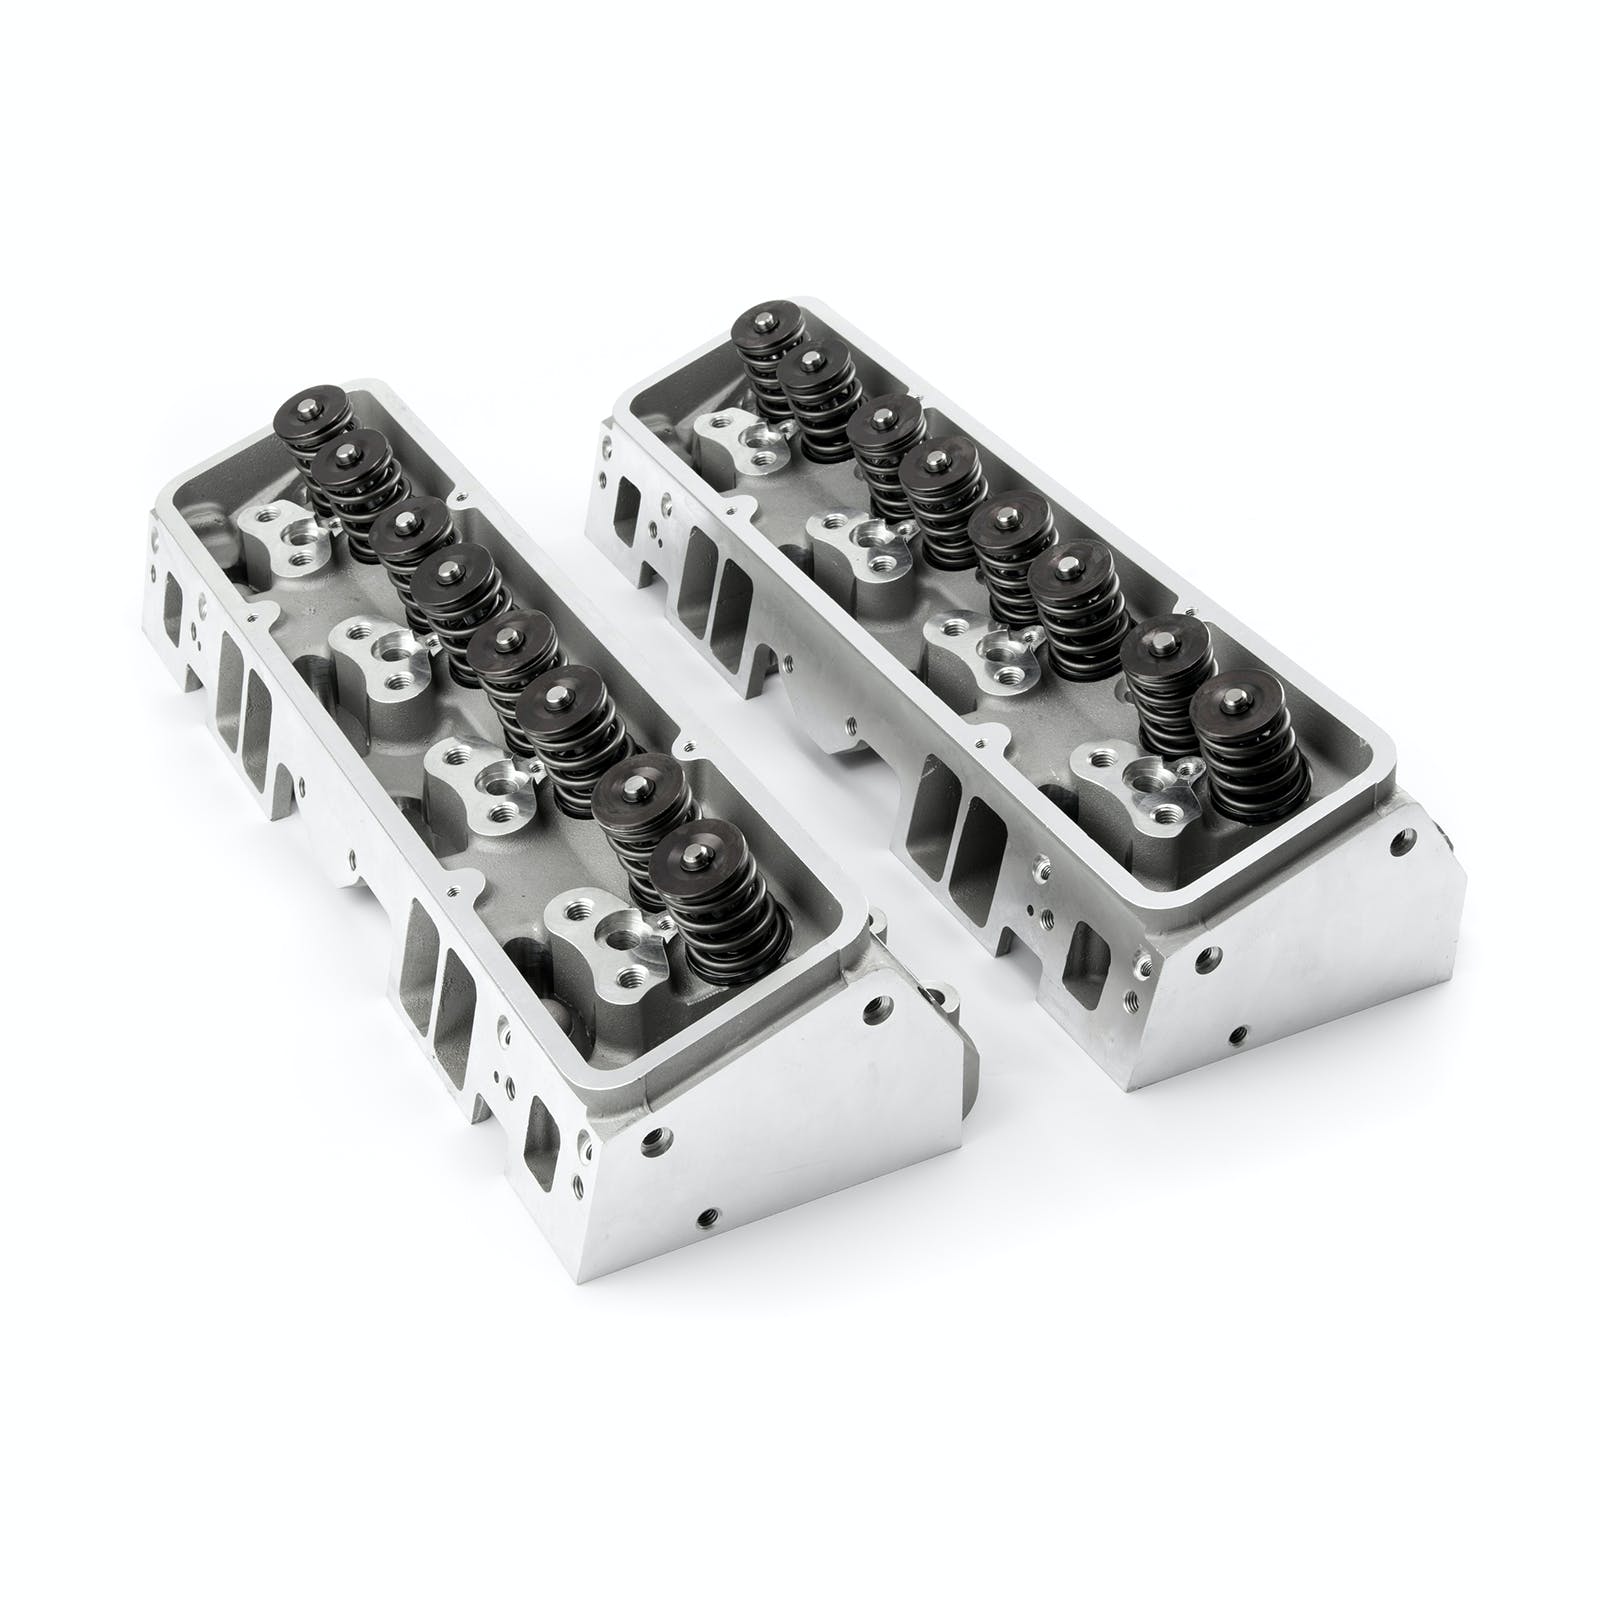 Speedmaster PCE281.2007 205cc 64cc Angle Hydr-FT Complete Aluminum Cylinder Heads